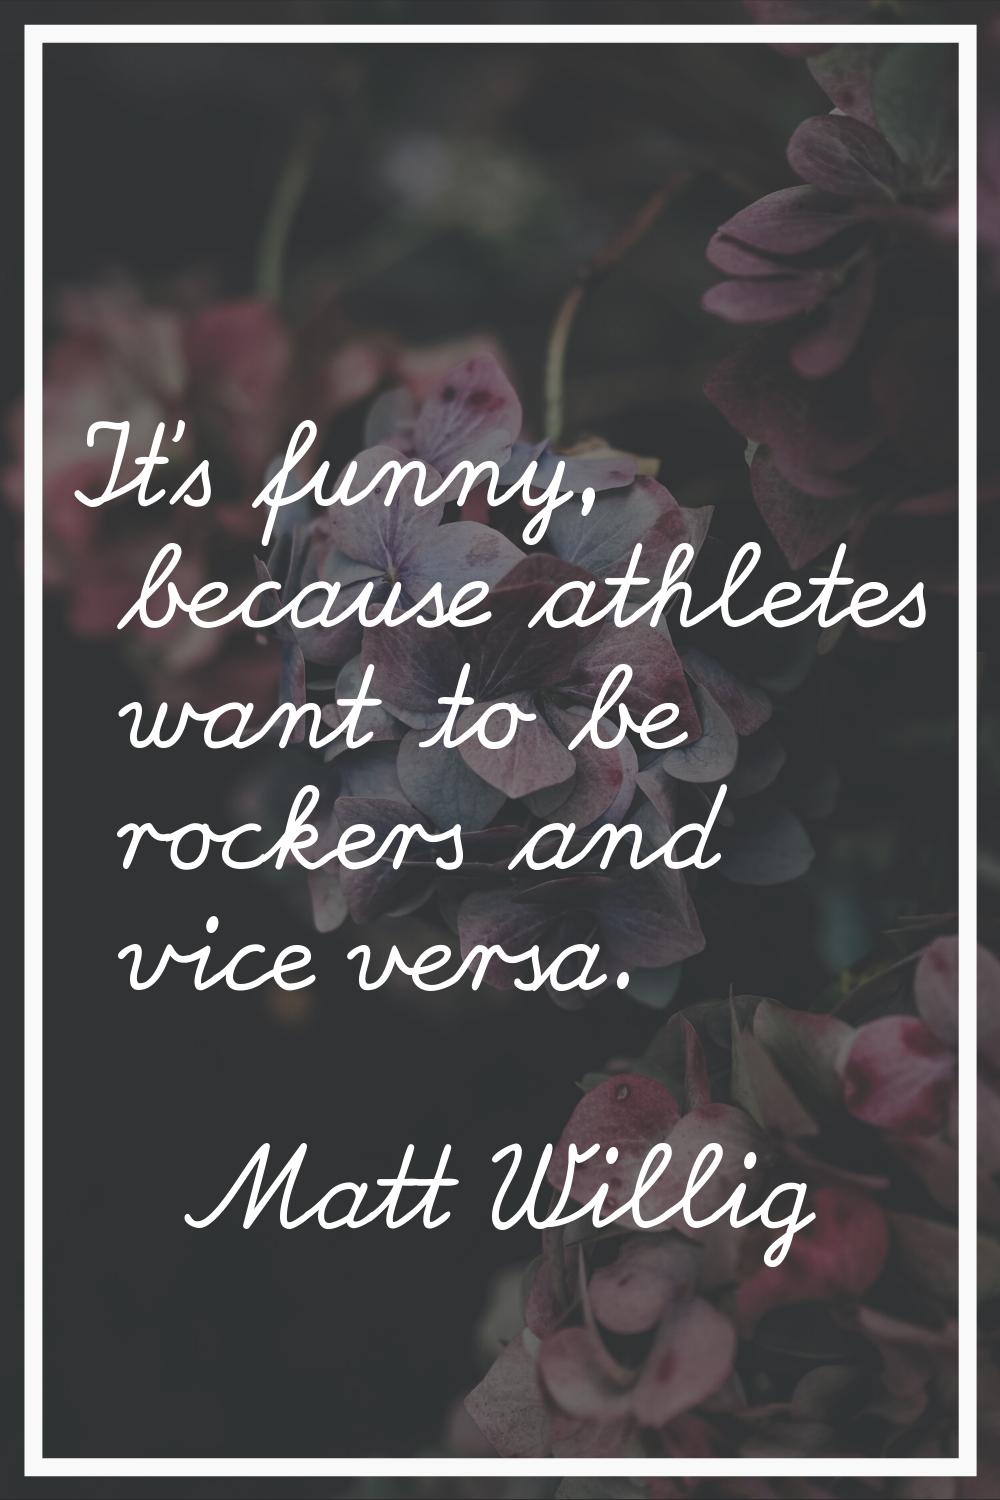 It's funny, because athletes want to be rockers and vice versa.